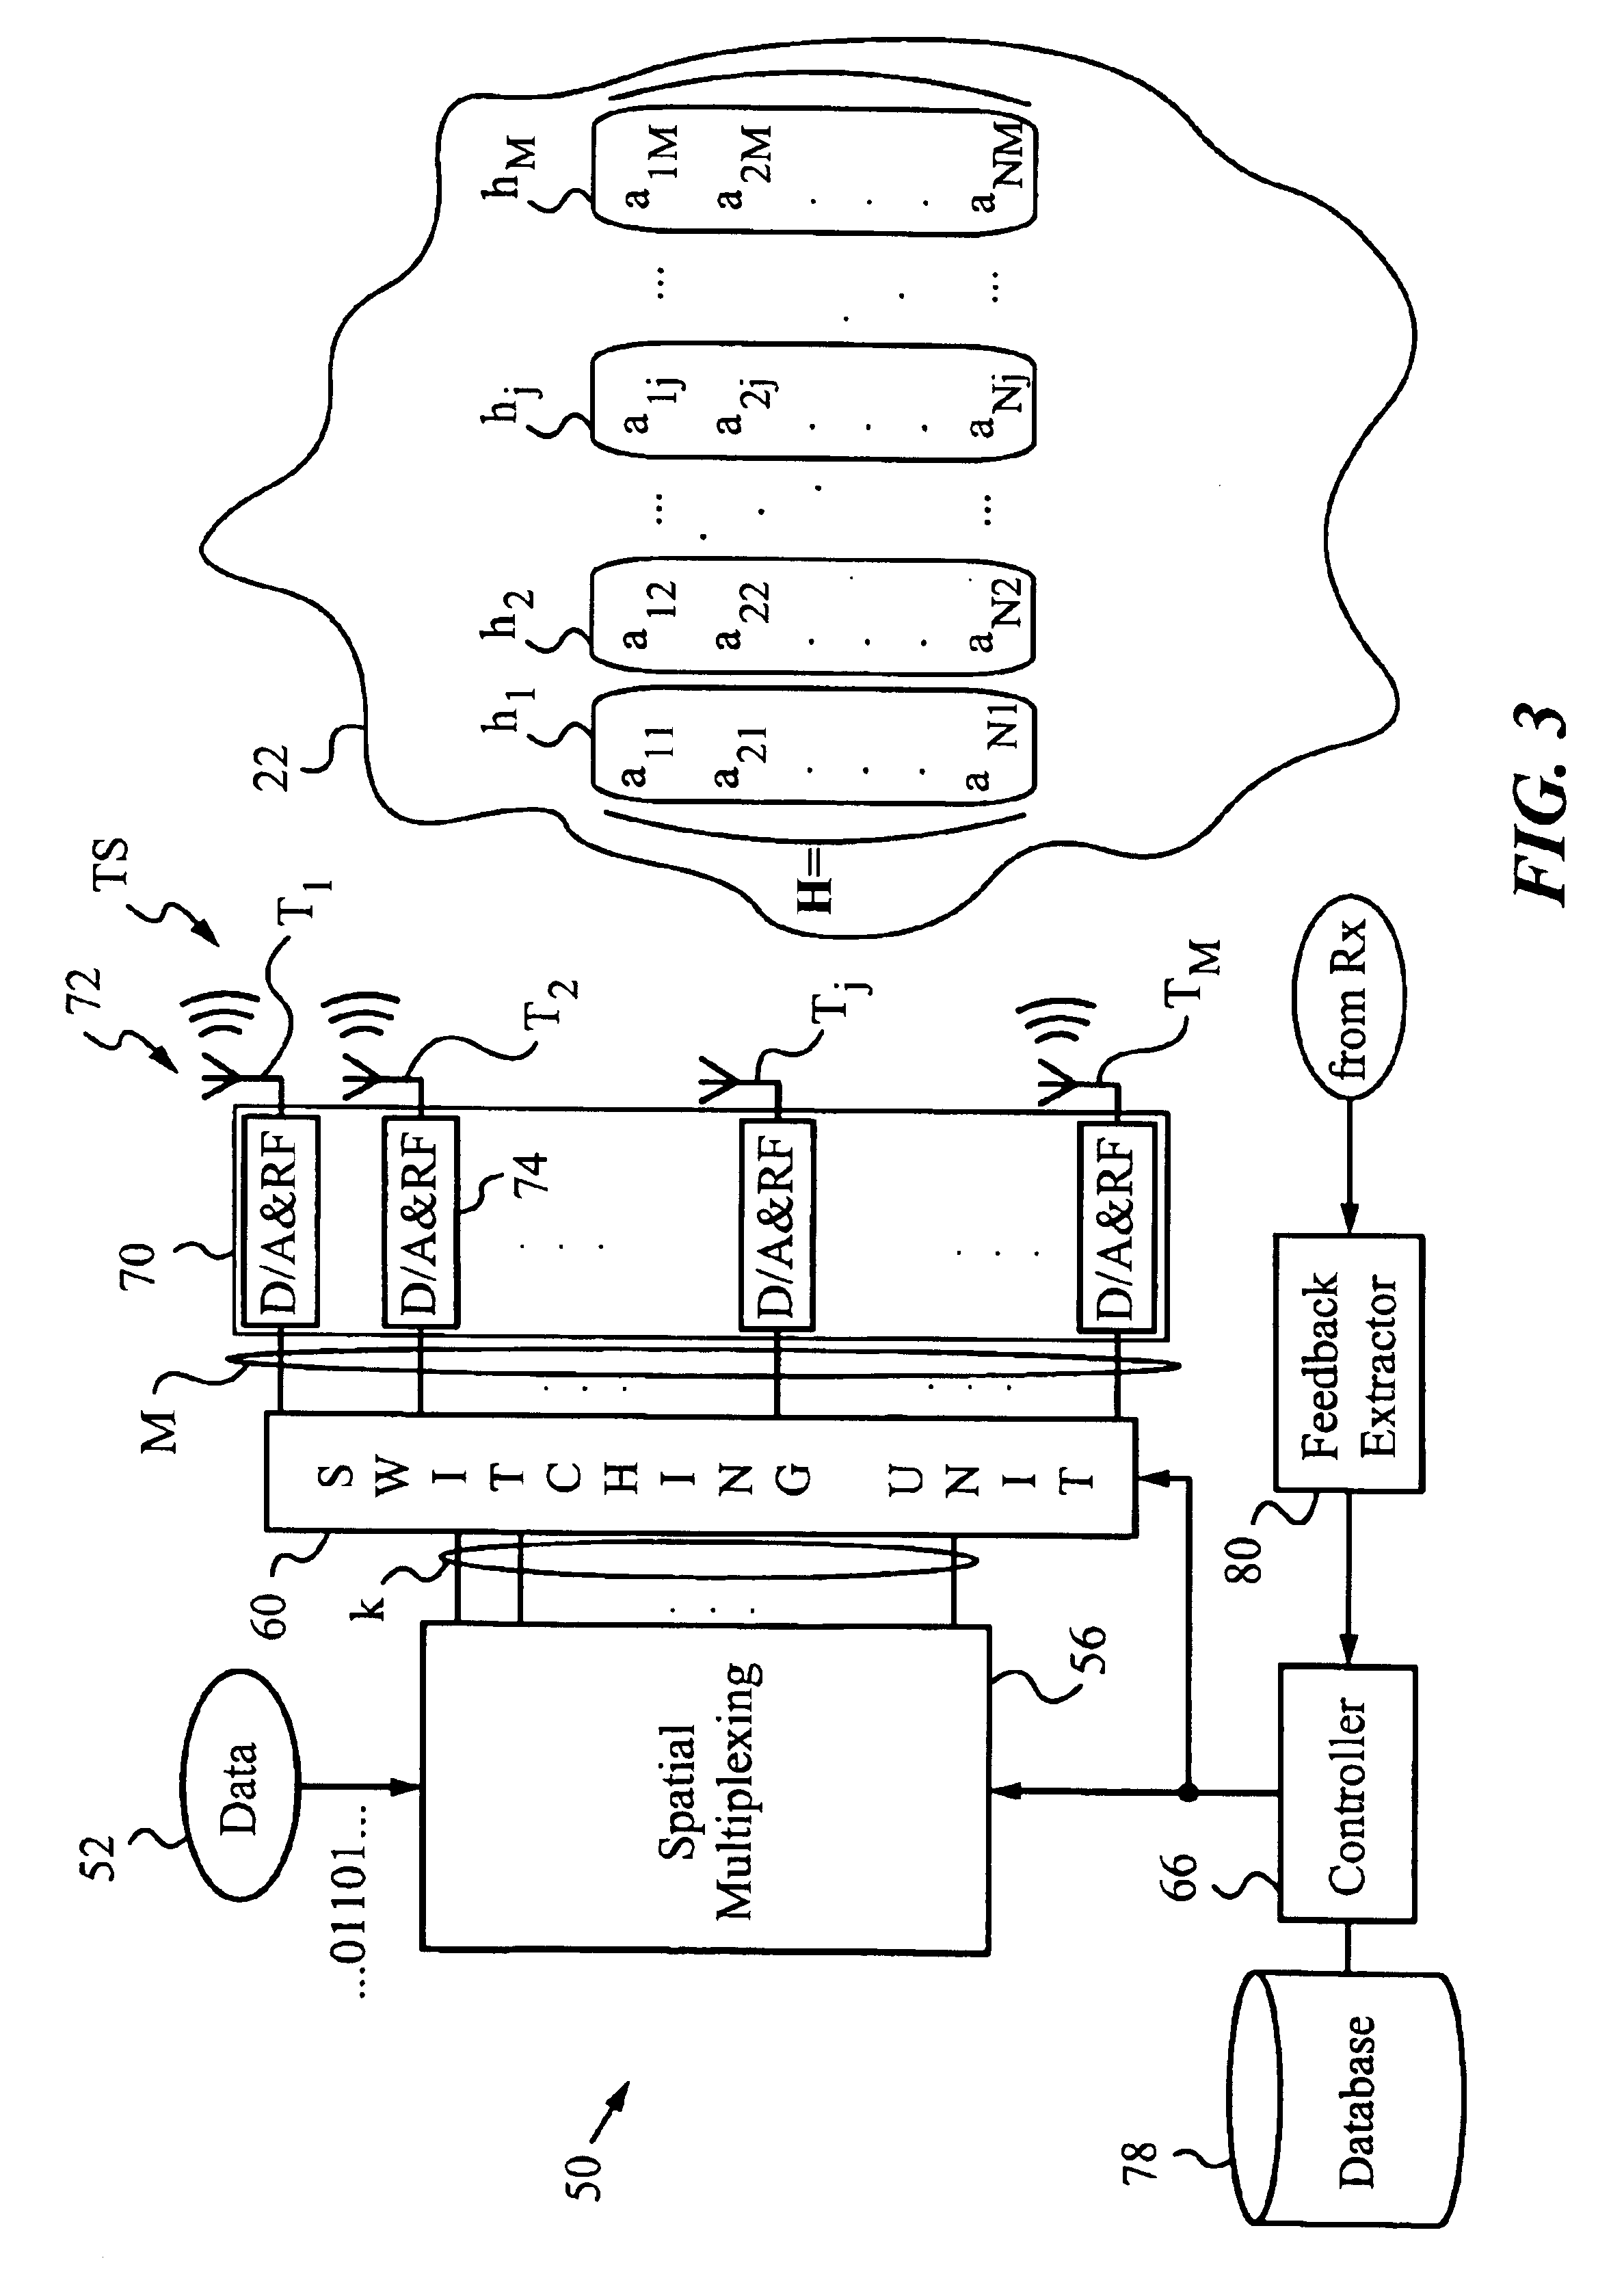 Method and system for mode adaptation in wireless communication